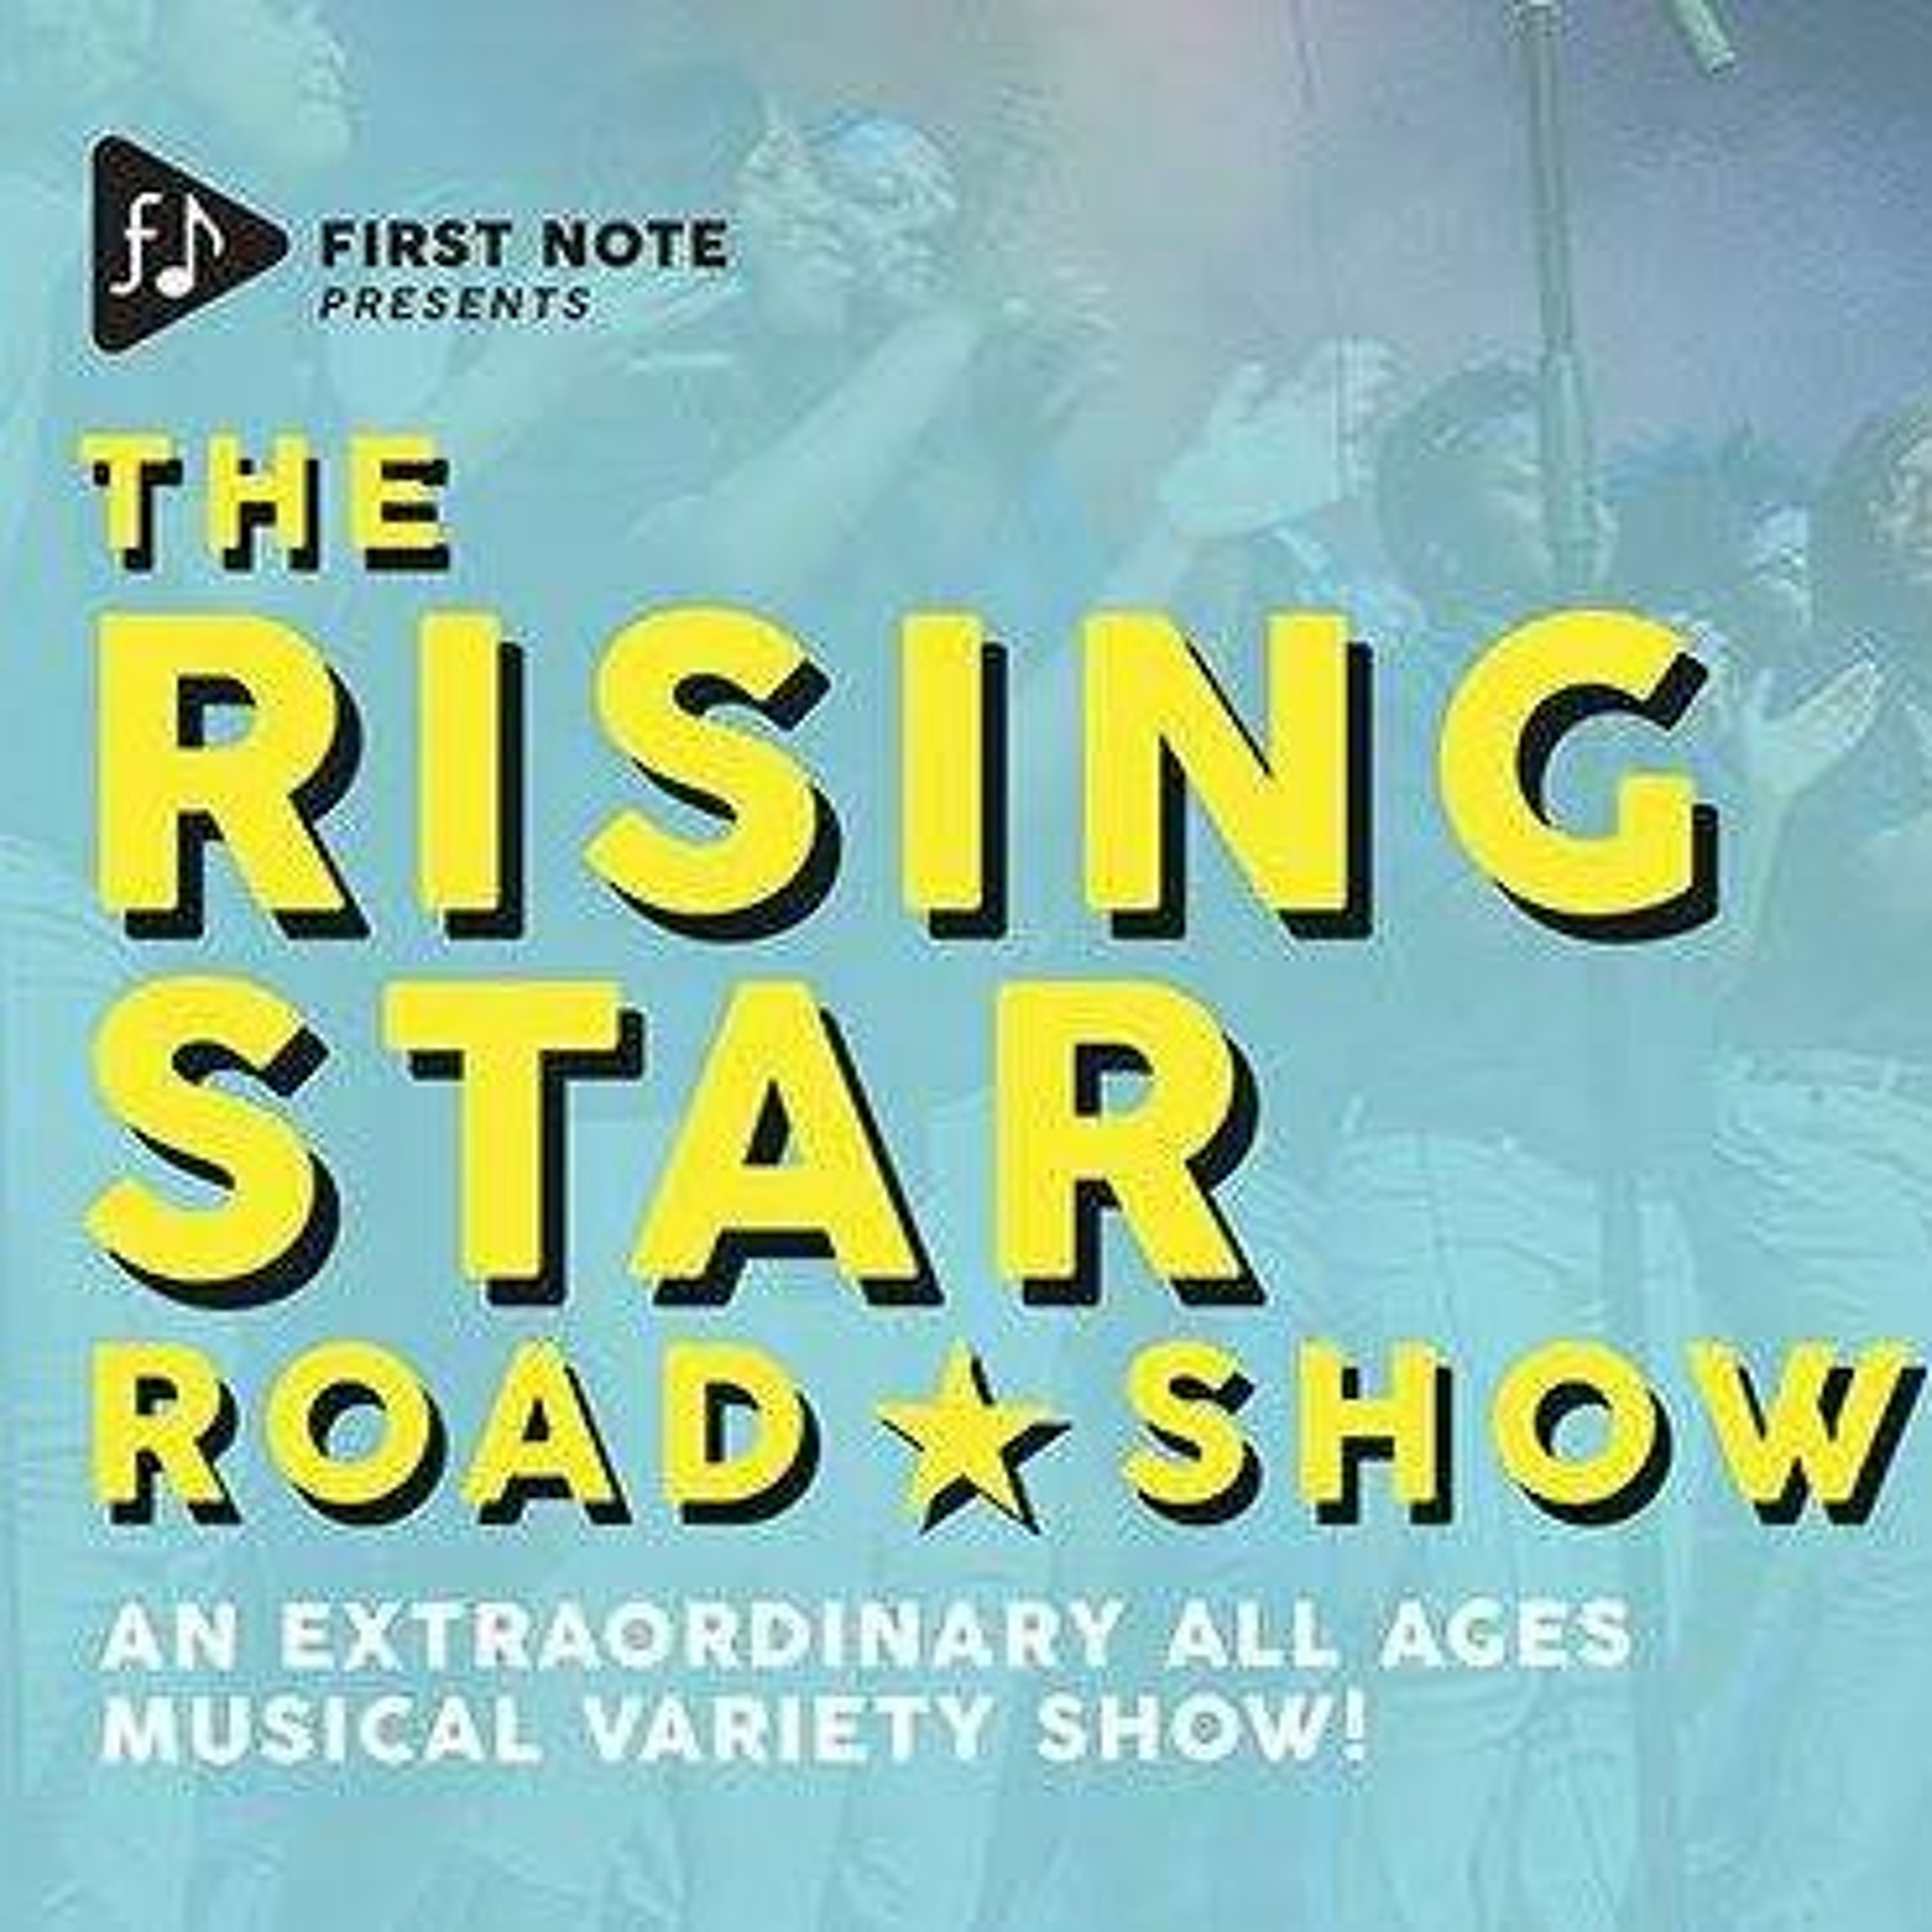 30A Show: Rising Star Road Show